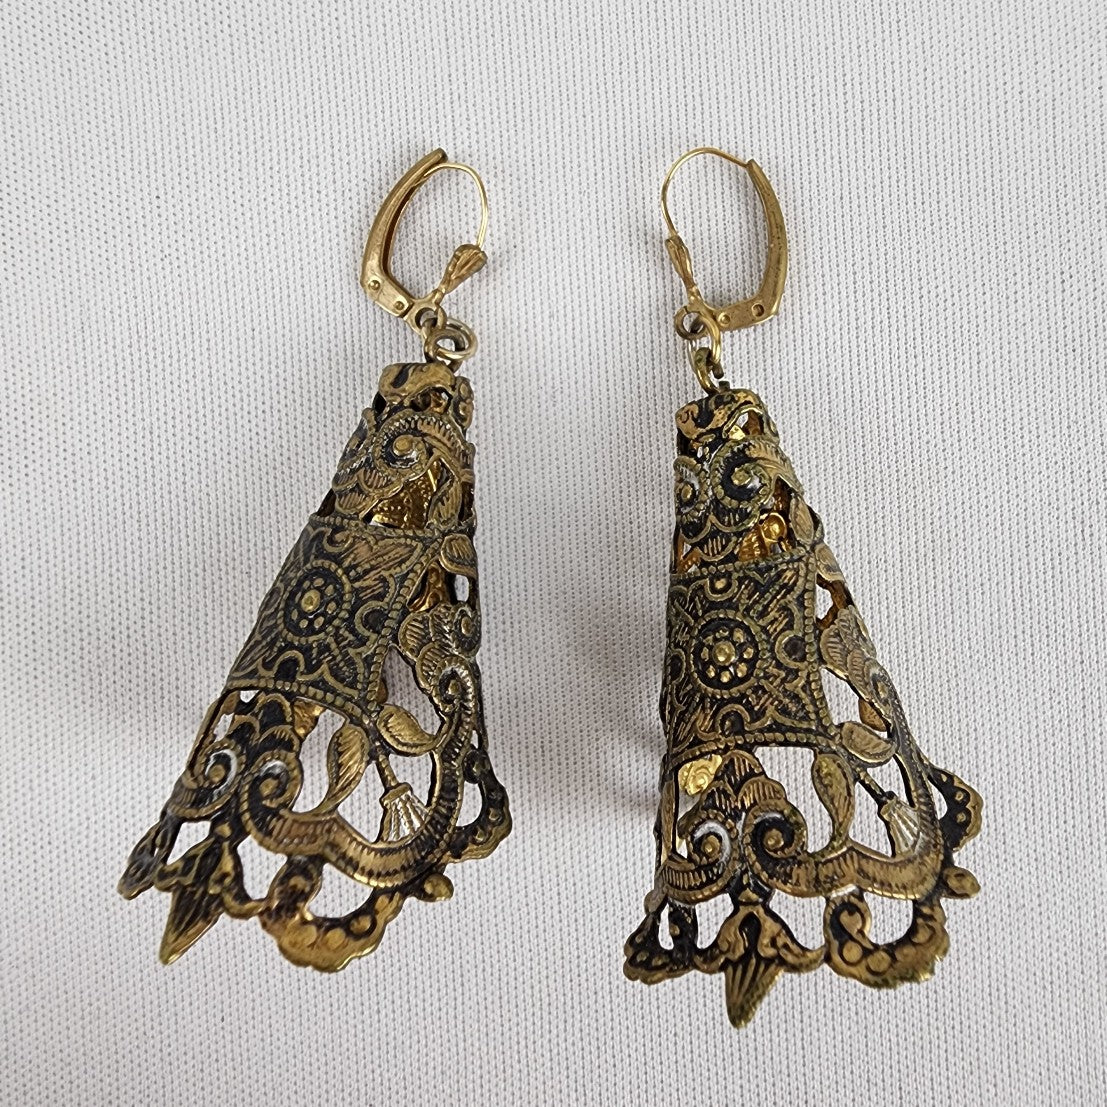 Vintage Gold Tone Etched Filigree Floral Statement Earrings